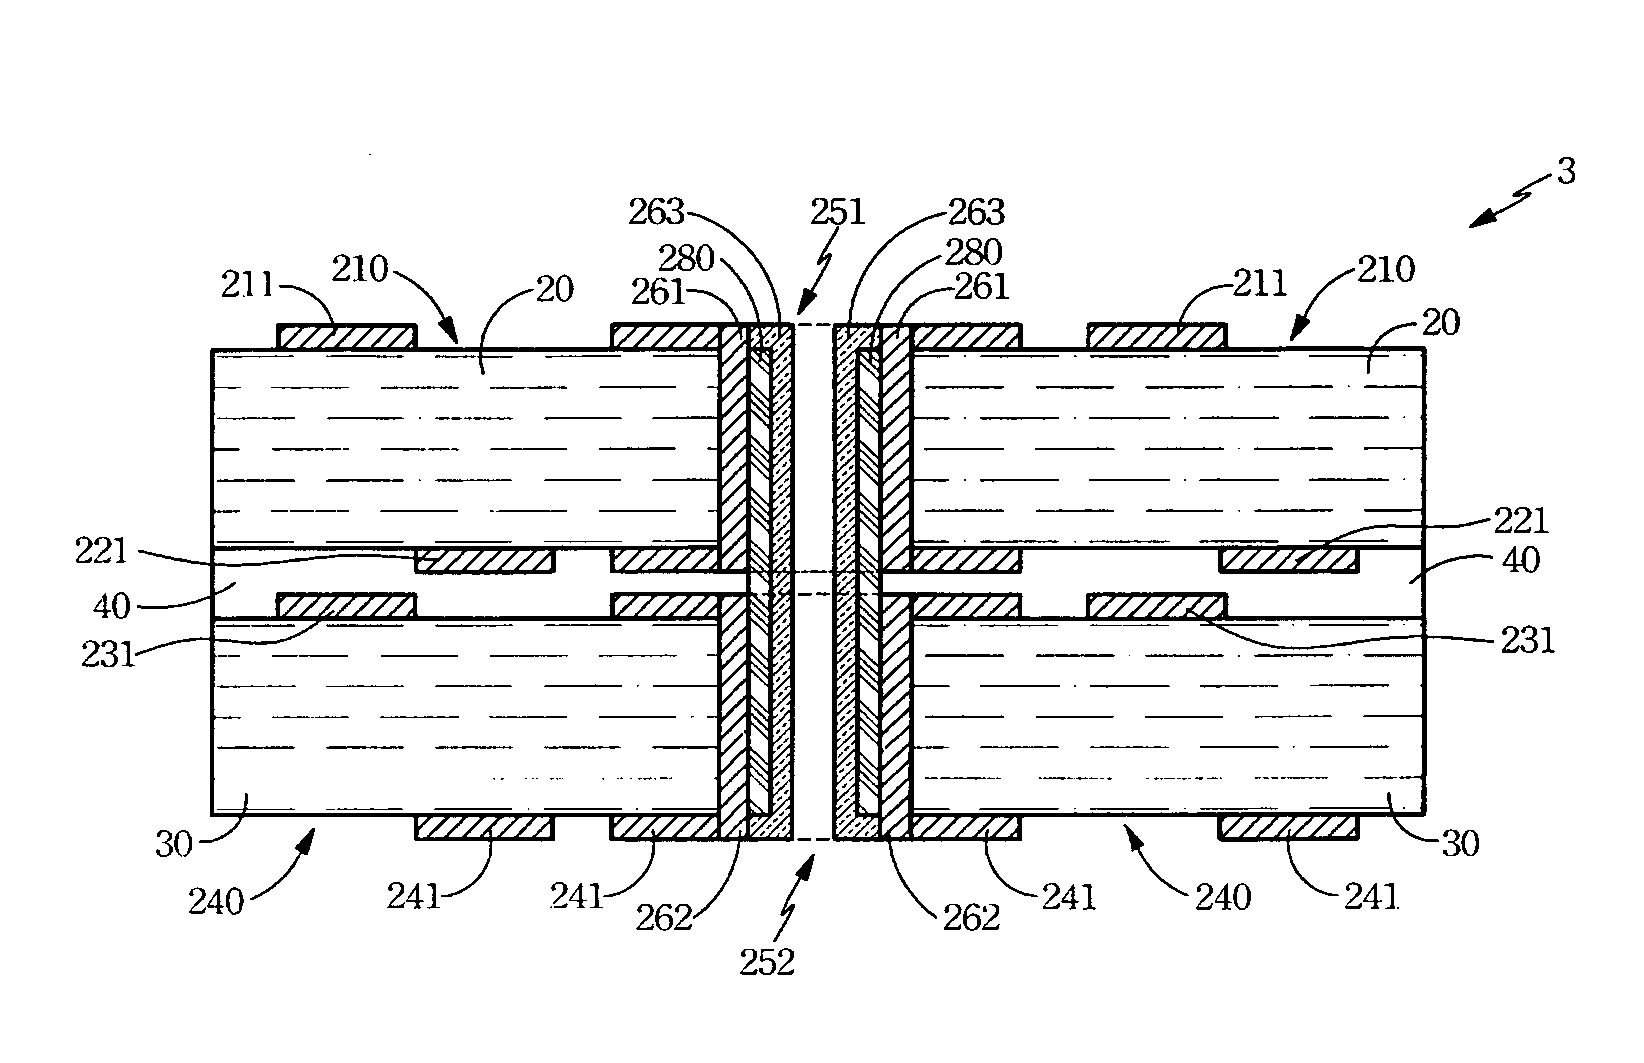 Method for making a circuit board and multi-layer substrate with plated through holes